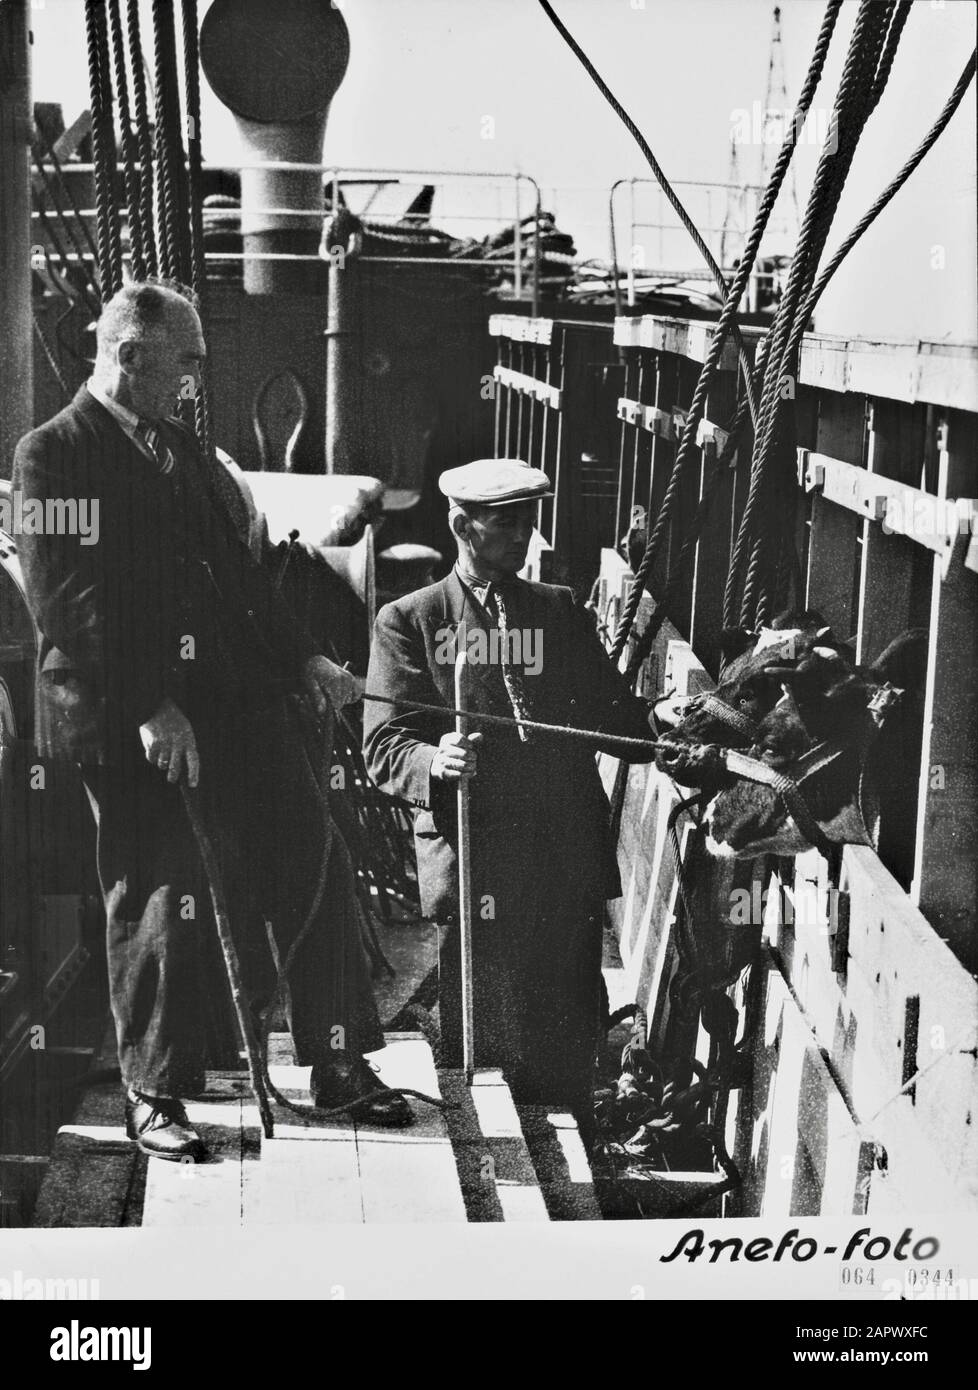 At the Thomsonkade in Rotterdam, 61 cows were embarked on board the MS Alioth, which leaves with 50 families (325 people) who are going to build a colony in Brazil. On deck long pens were made where the calves will stay during the journey. Two emigrants are standing at the lofts with calves Date: 5 September 1952 Location: Rotterdam, Zuid-Holland Keywords: emigrants, emigration, cattle, cattle, transport Stock Photo